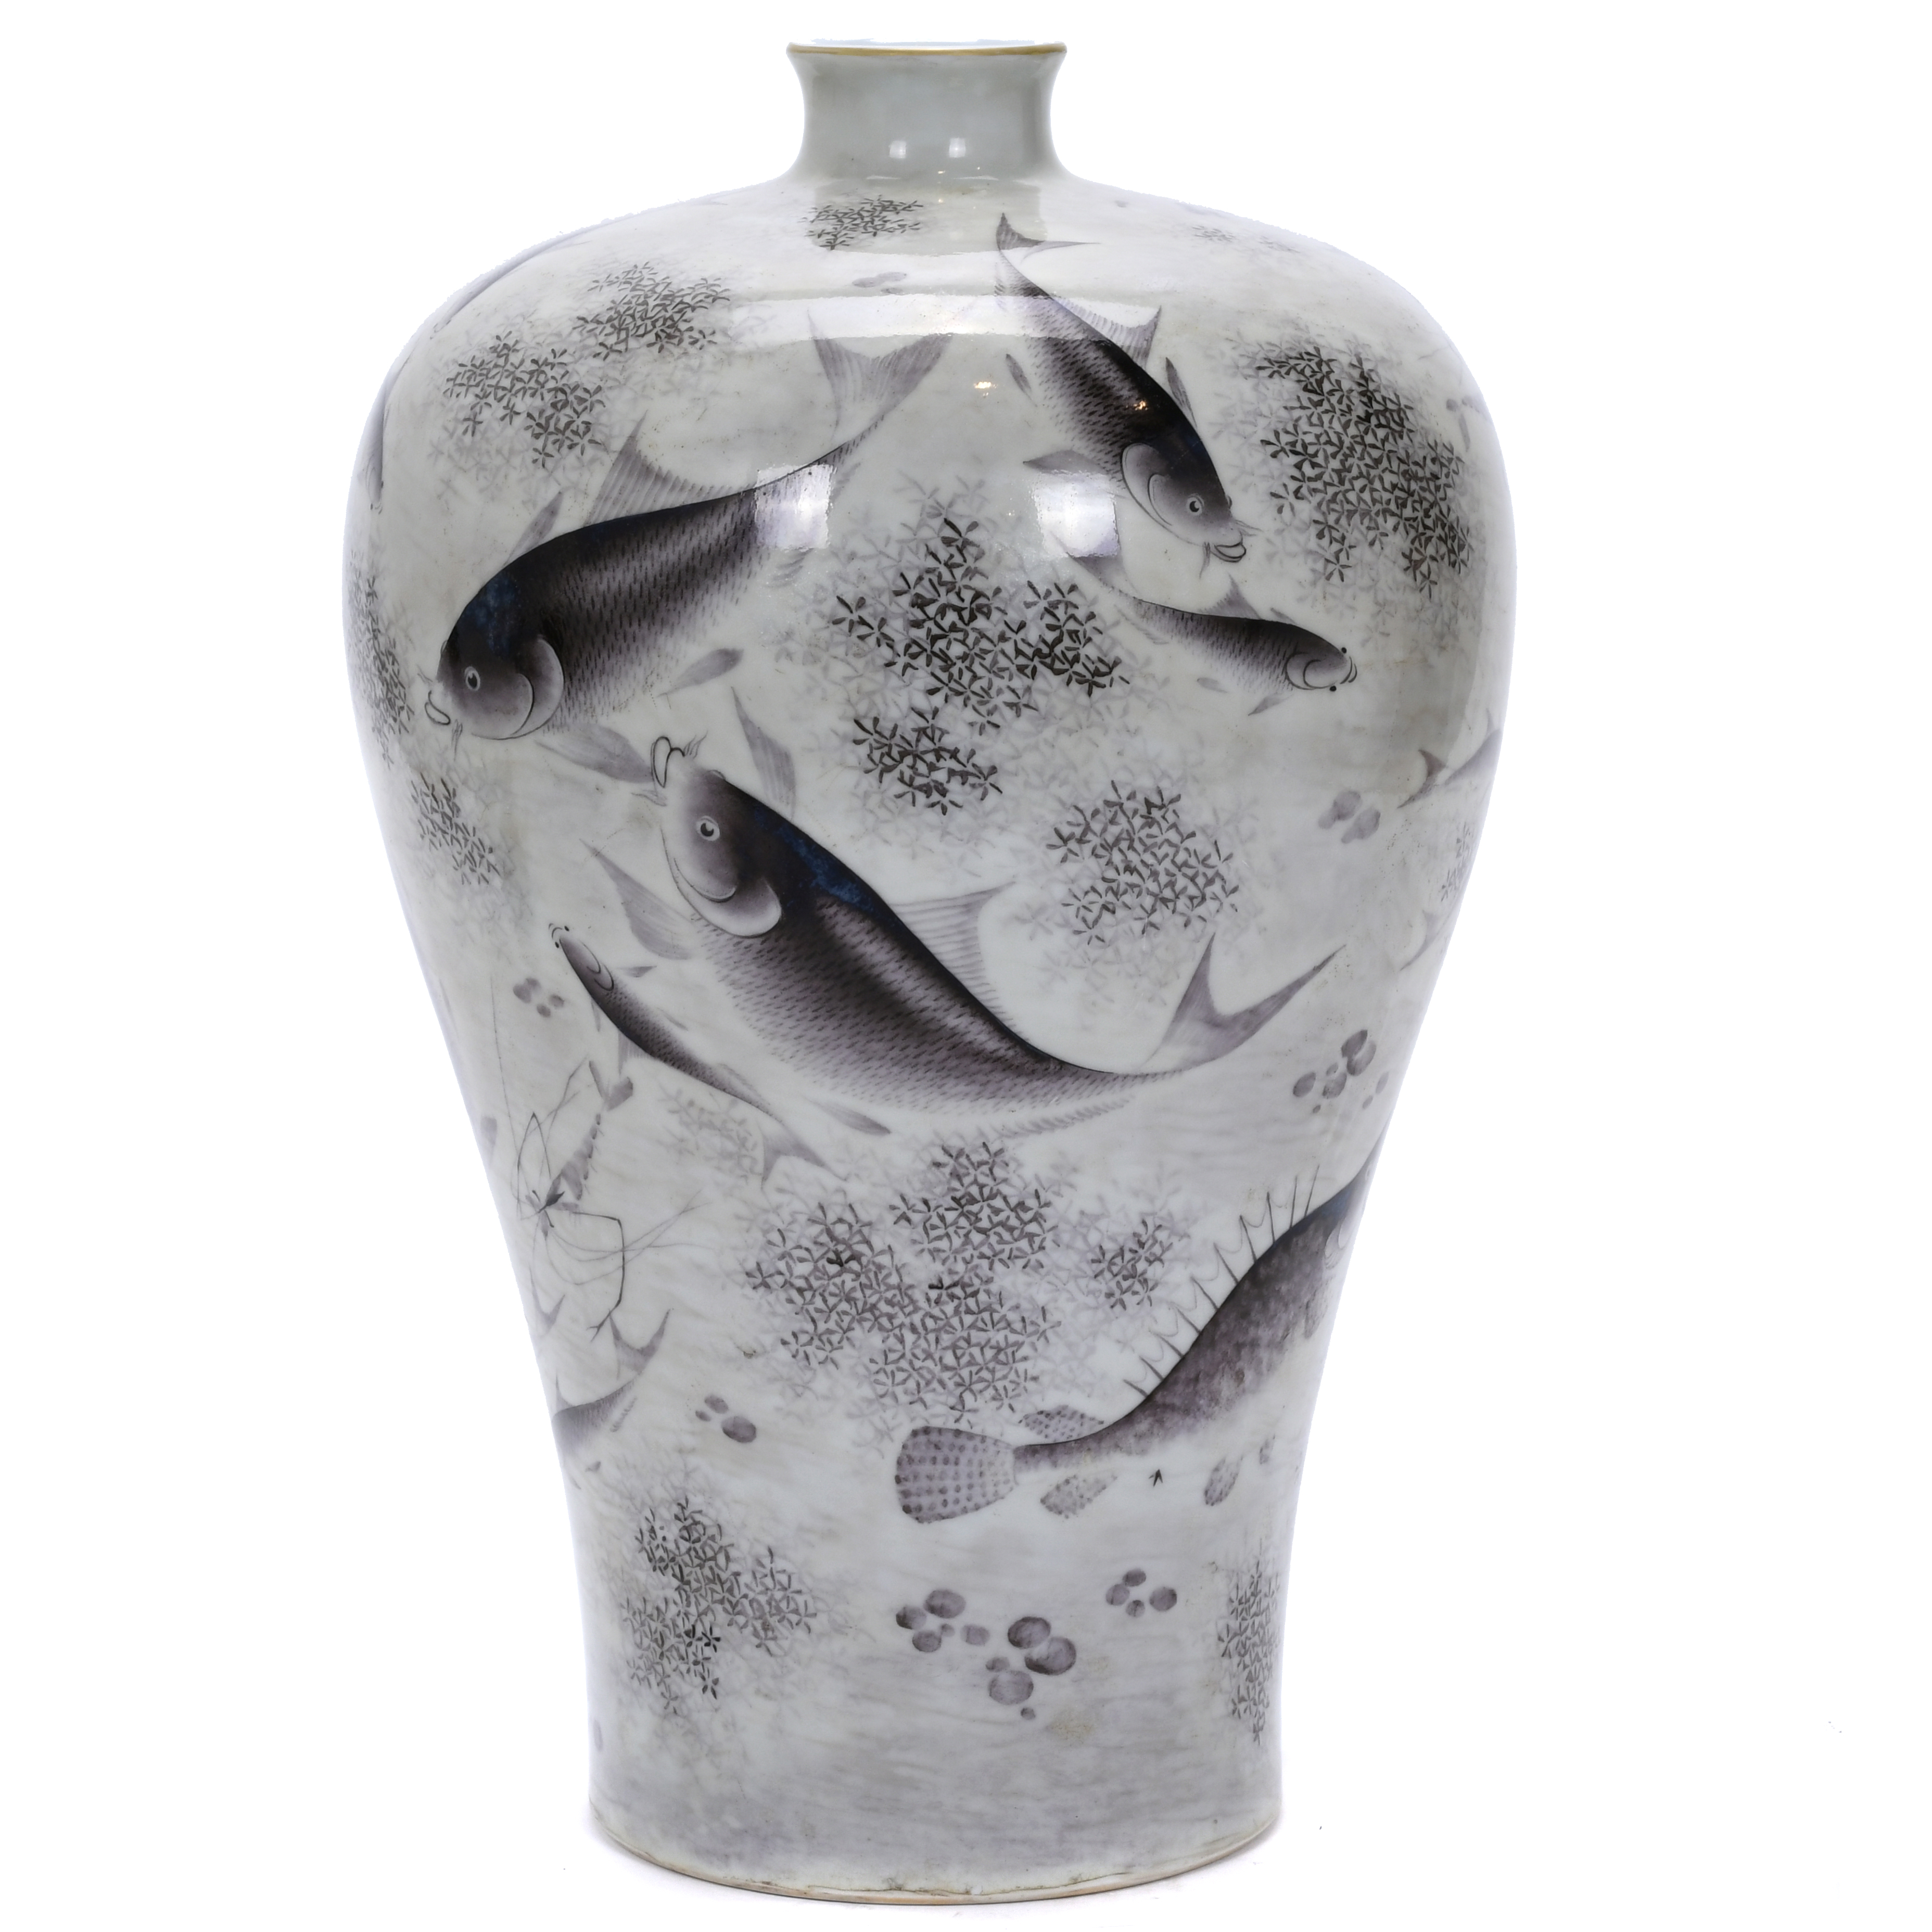 CHINESE VASE. FIRST HALF OF THE 20TH CENTURY.